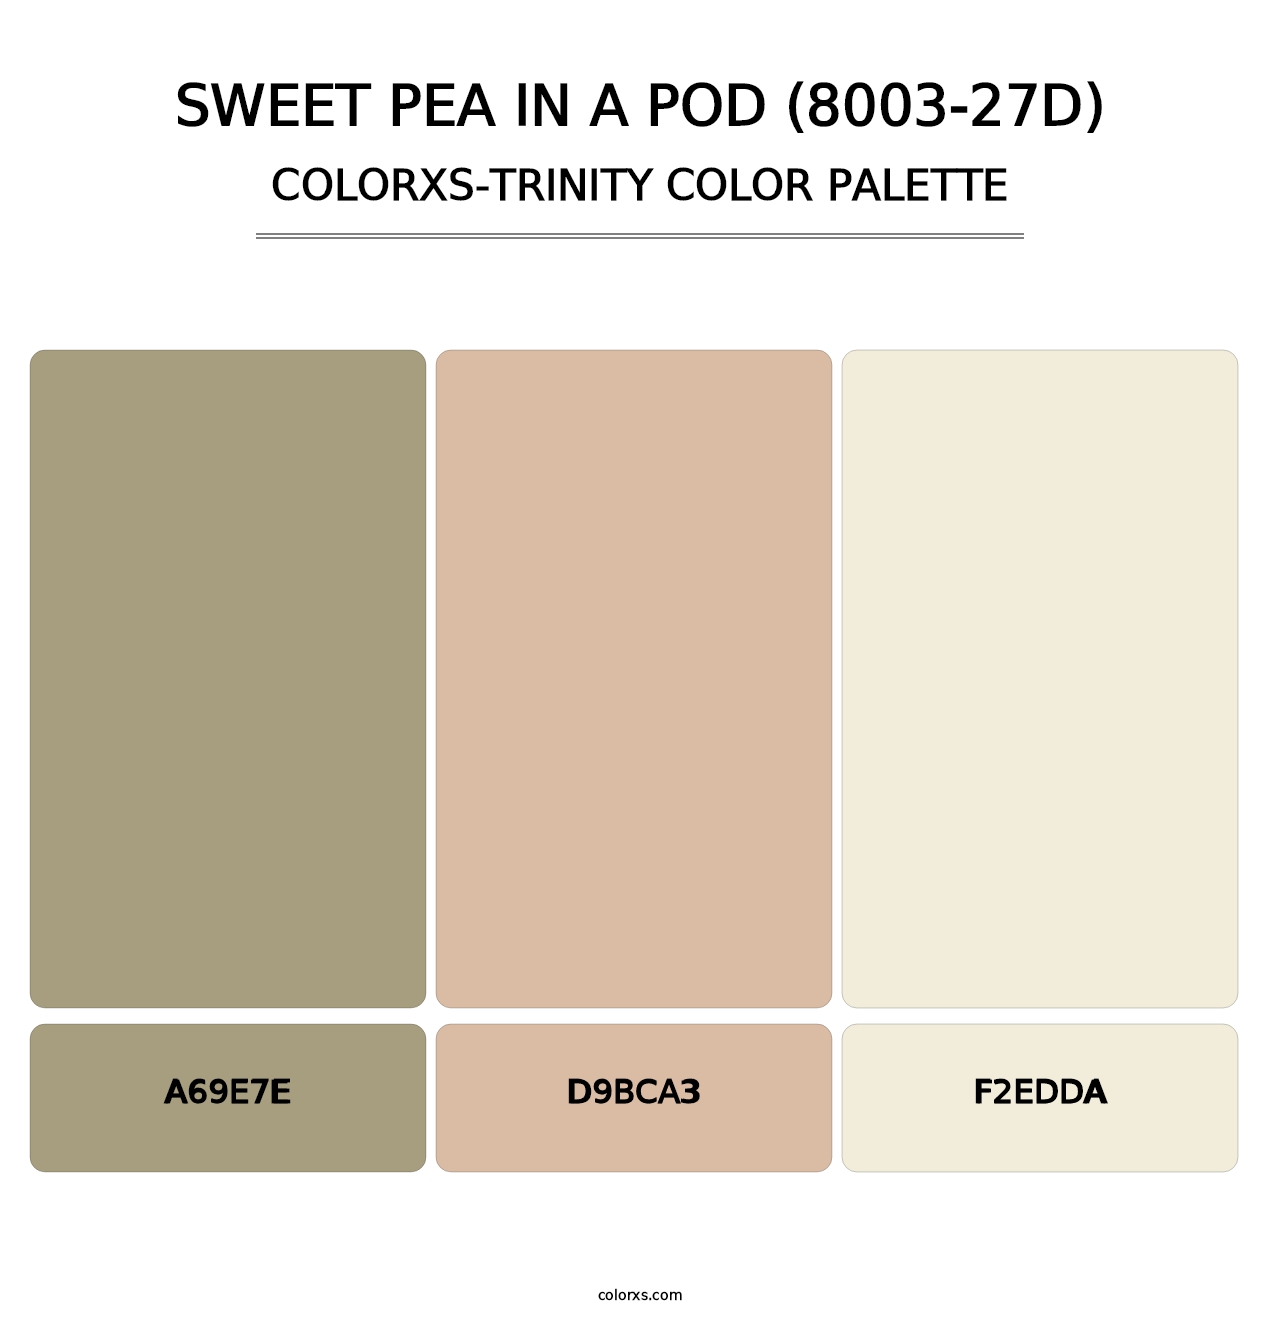 Sweet Pea in a Pod (8003-27D) - Colorxs Trinity Palette